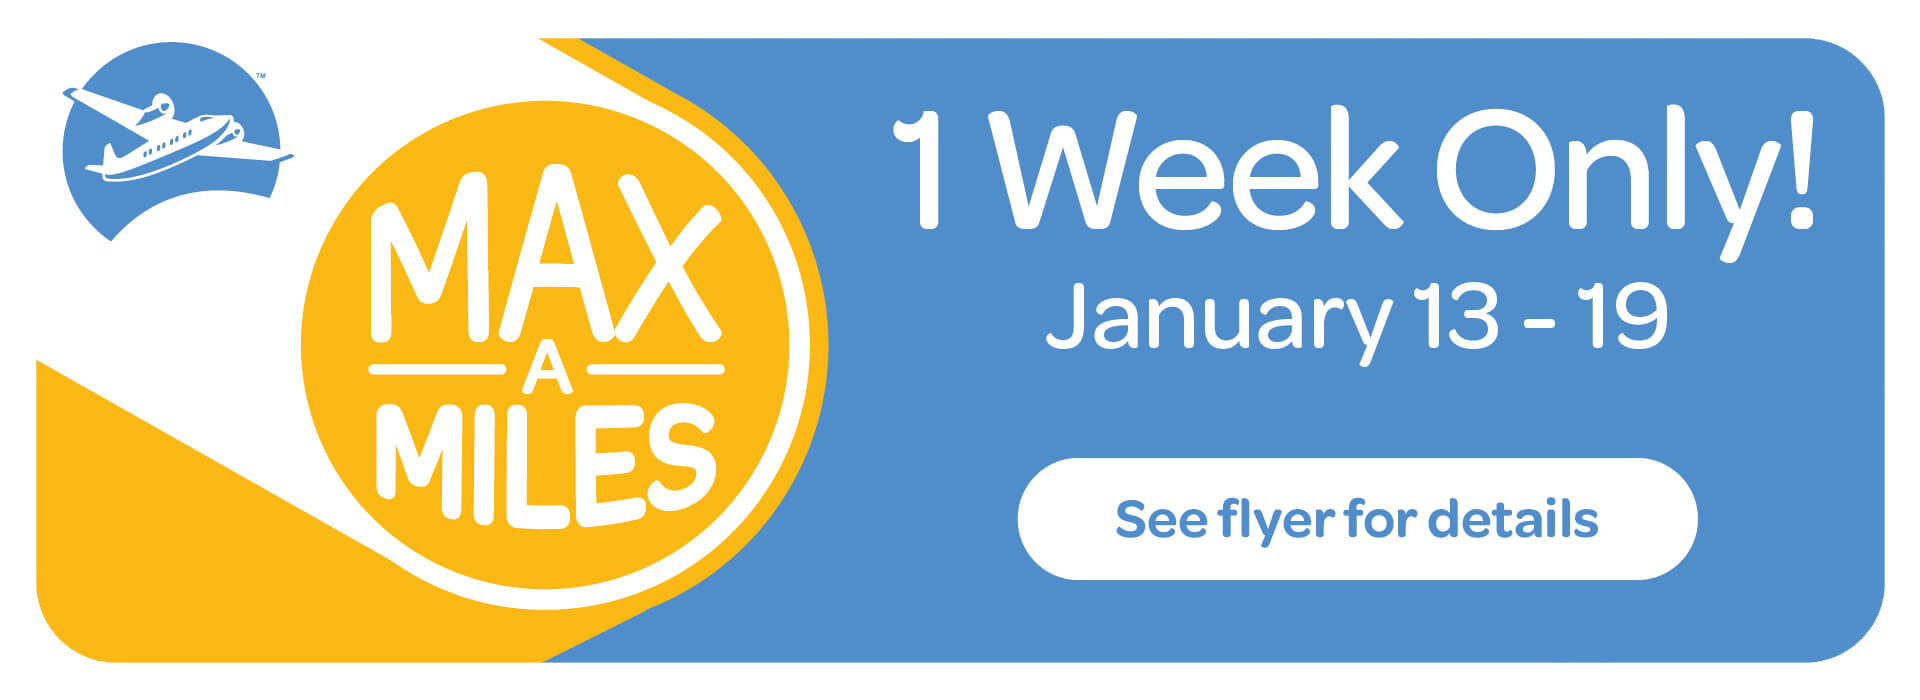 Text Reading 'Explore our Max A Miles Flyers. Valid for one week only January thirteen to January nineteen.' Along with a 'See flyer' button below.